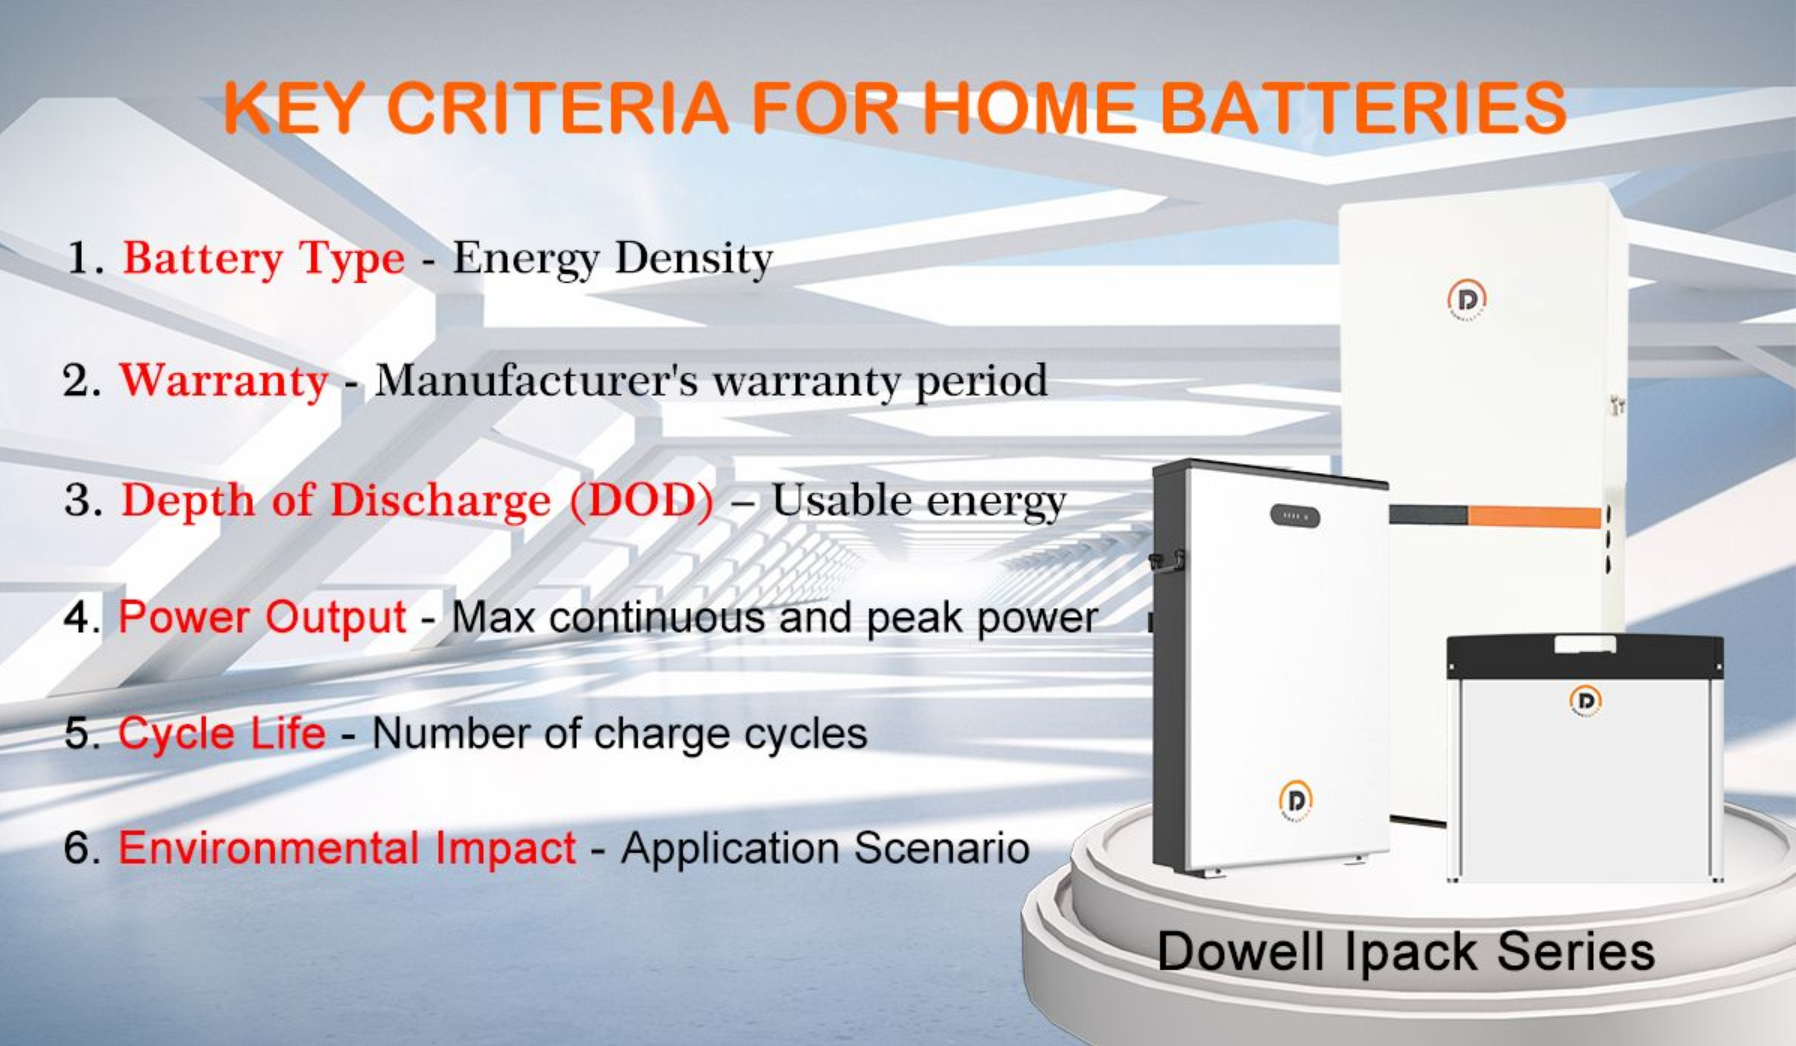 Key Criteria for Home Battery